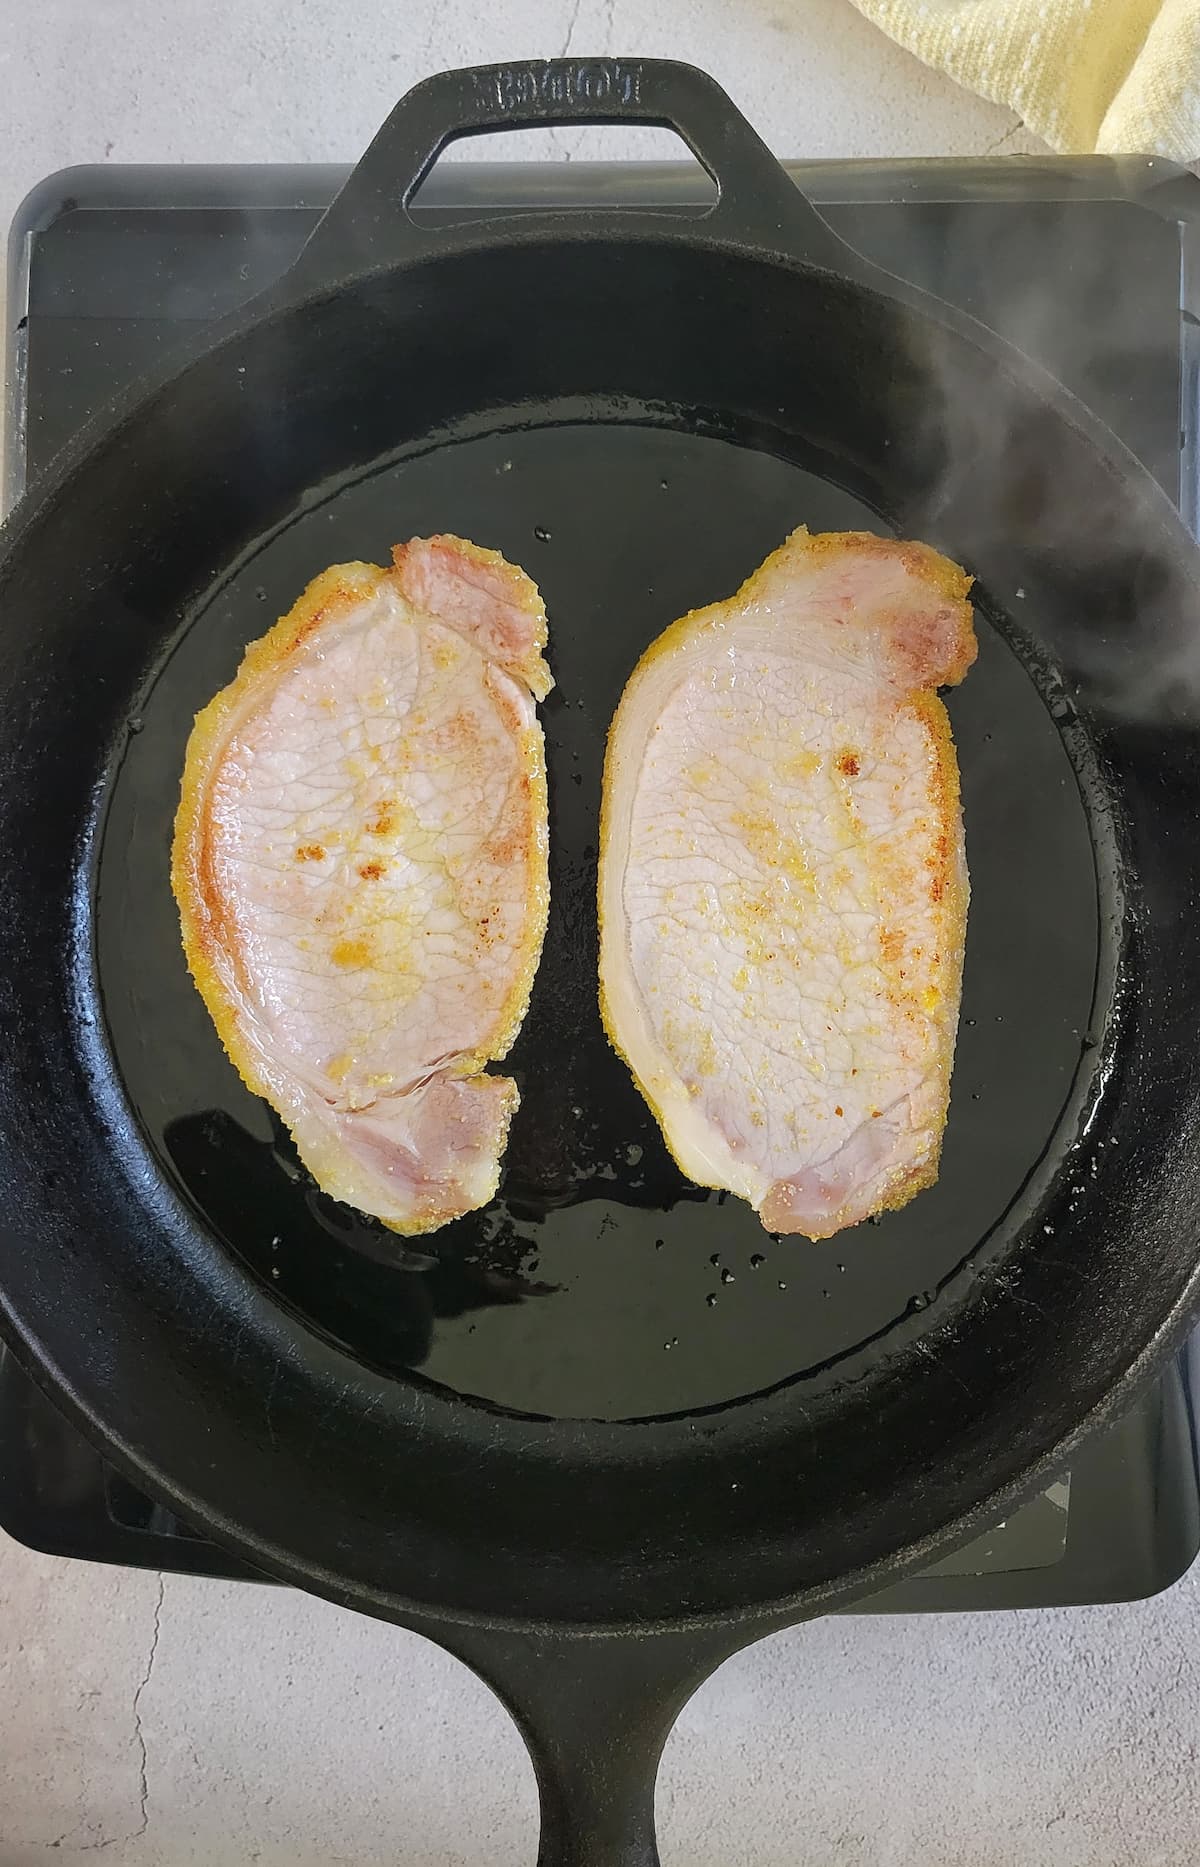 2 slices of peameal bacon cooking in a cast iron skillet